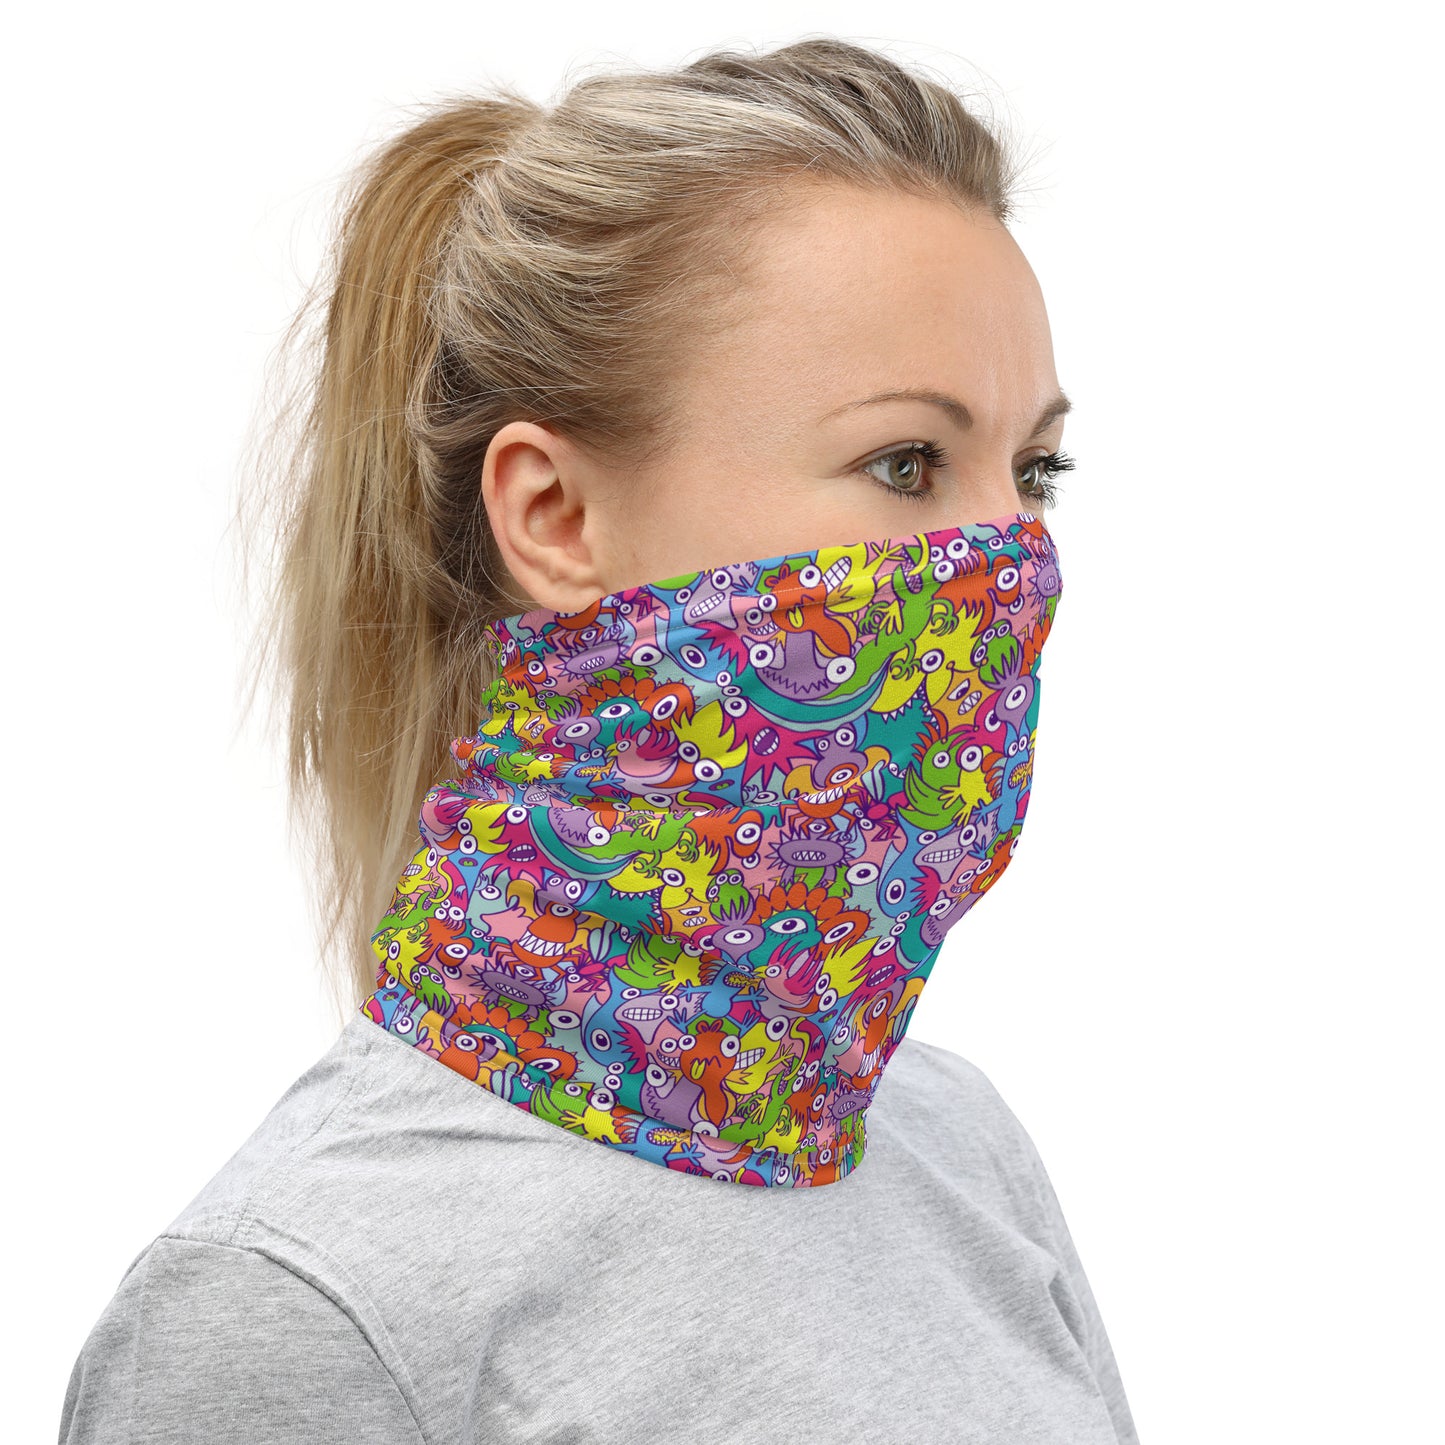 Doodle art street parade Neck Gaiter Used as a neck warmer